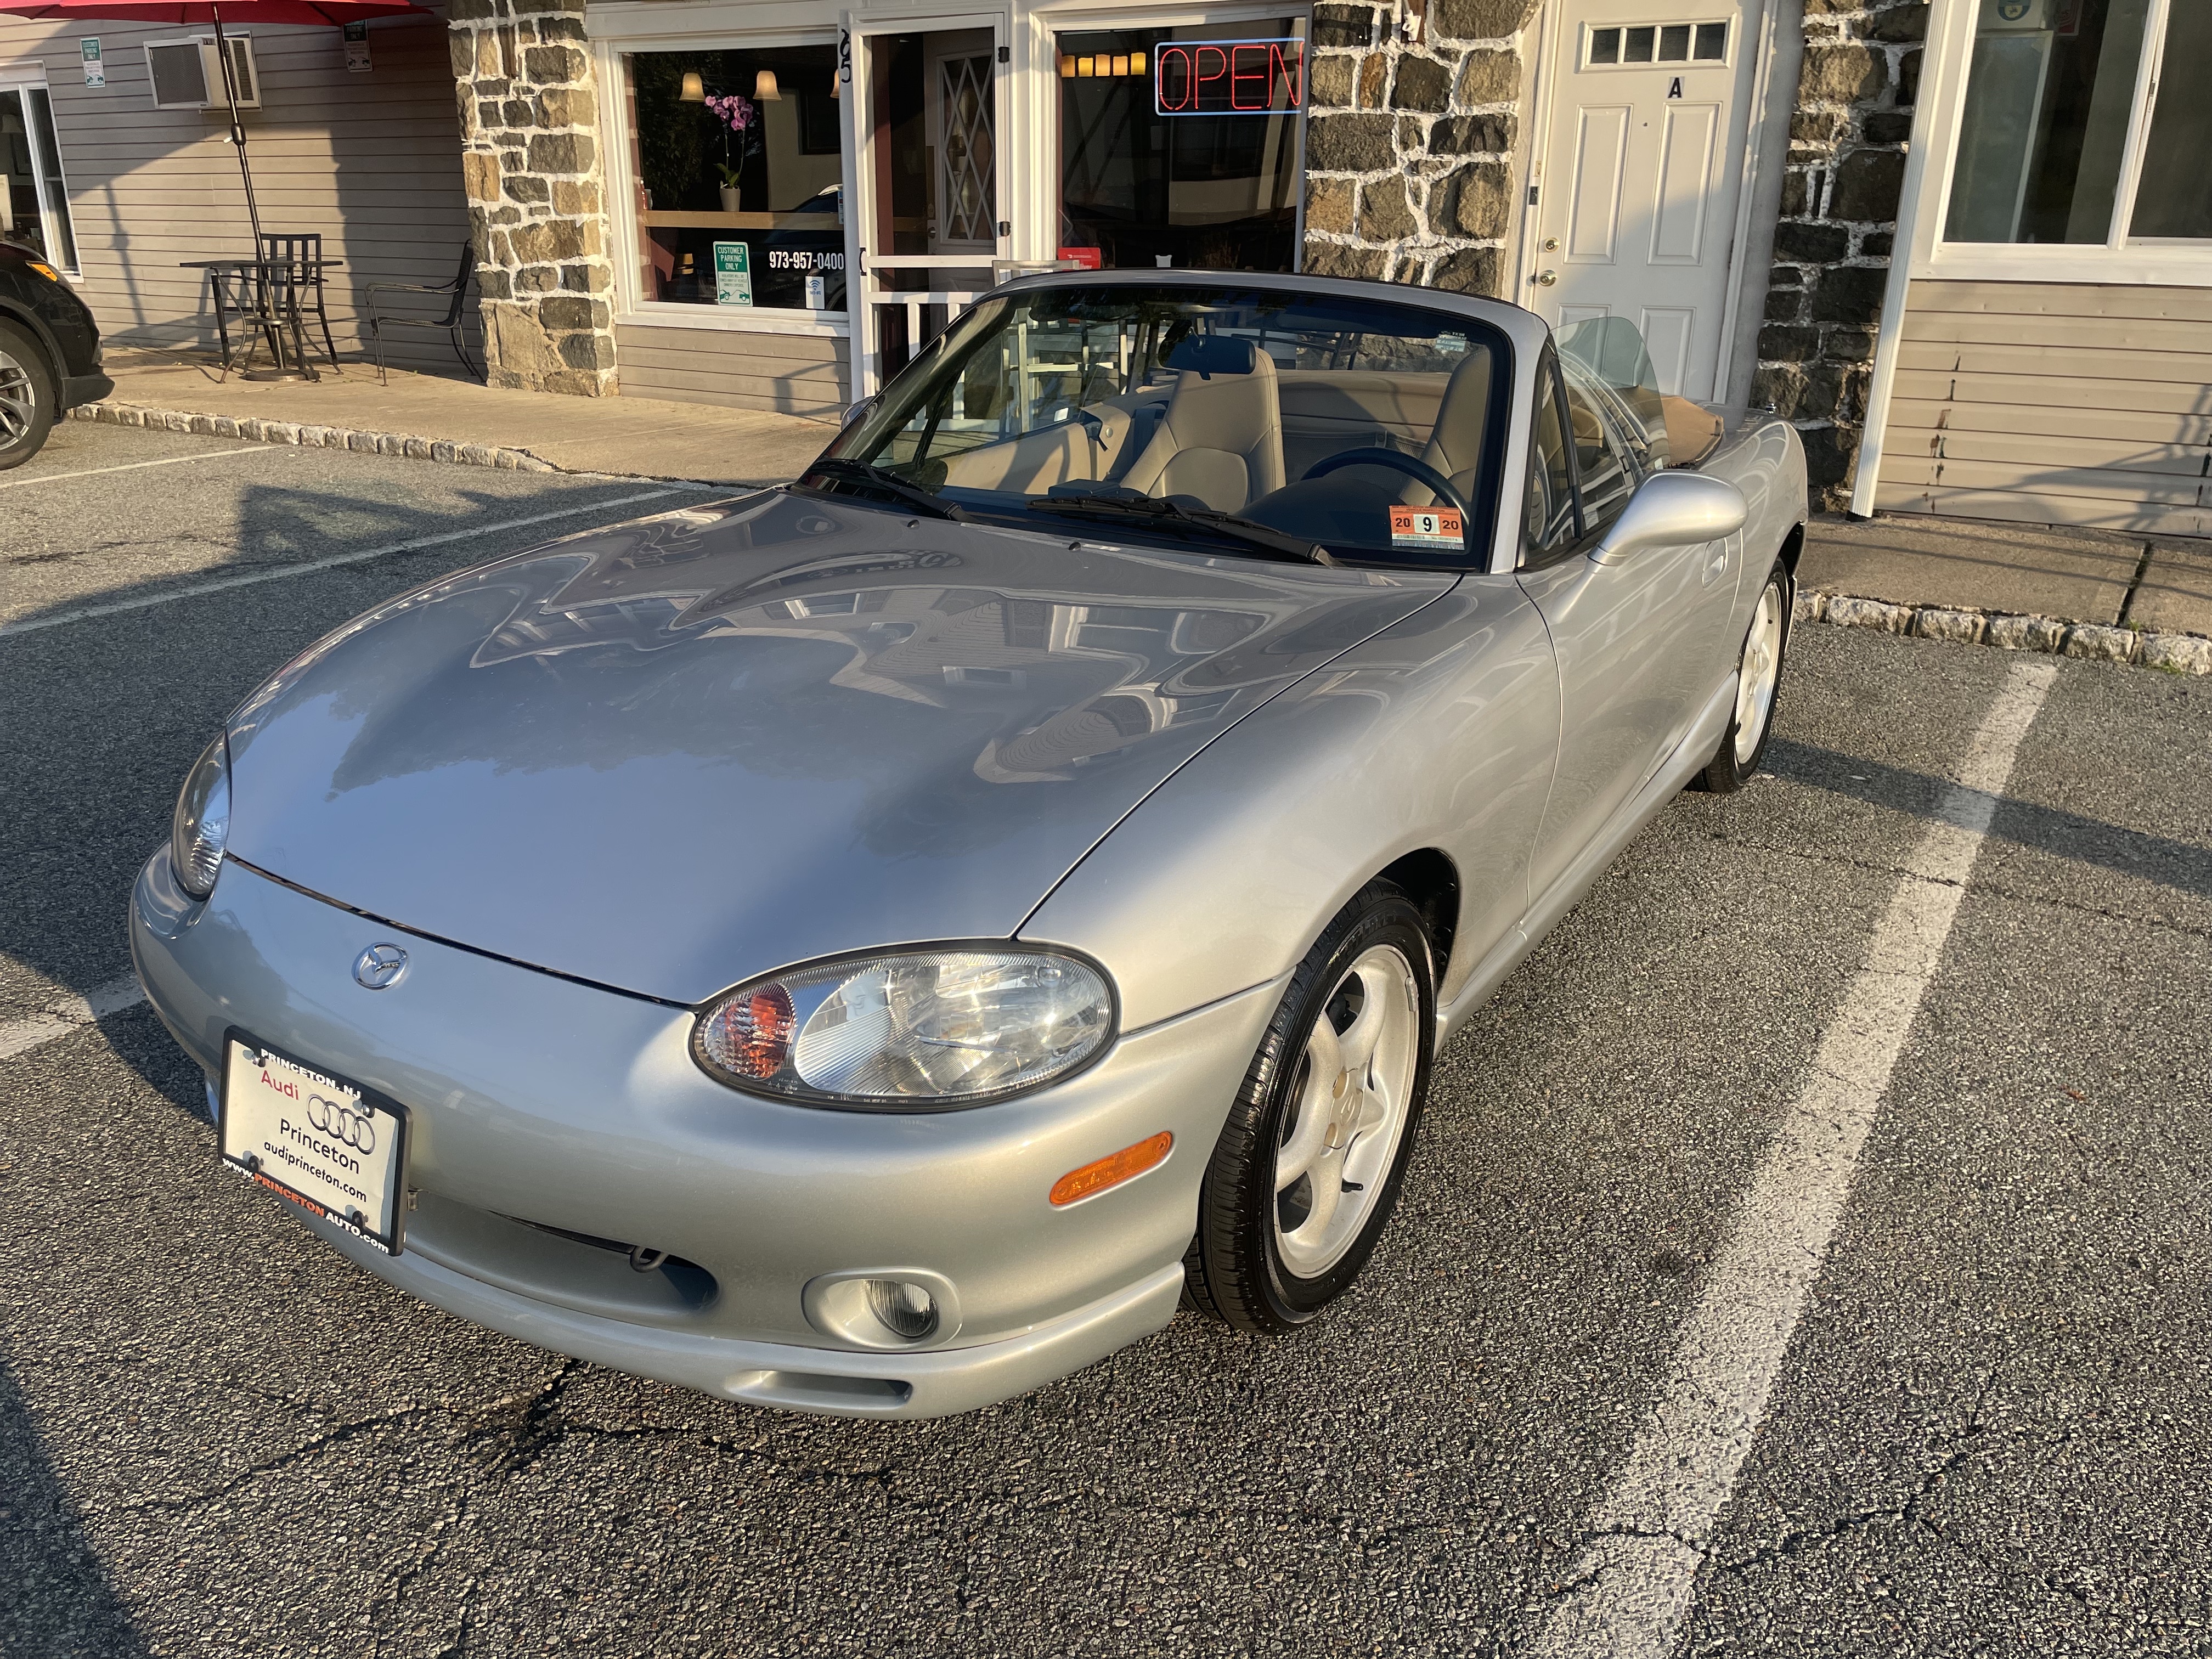 You Can Get a Used ND Mazda Miata for Less Than $15,000 - Autotrader